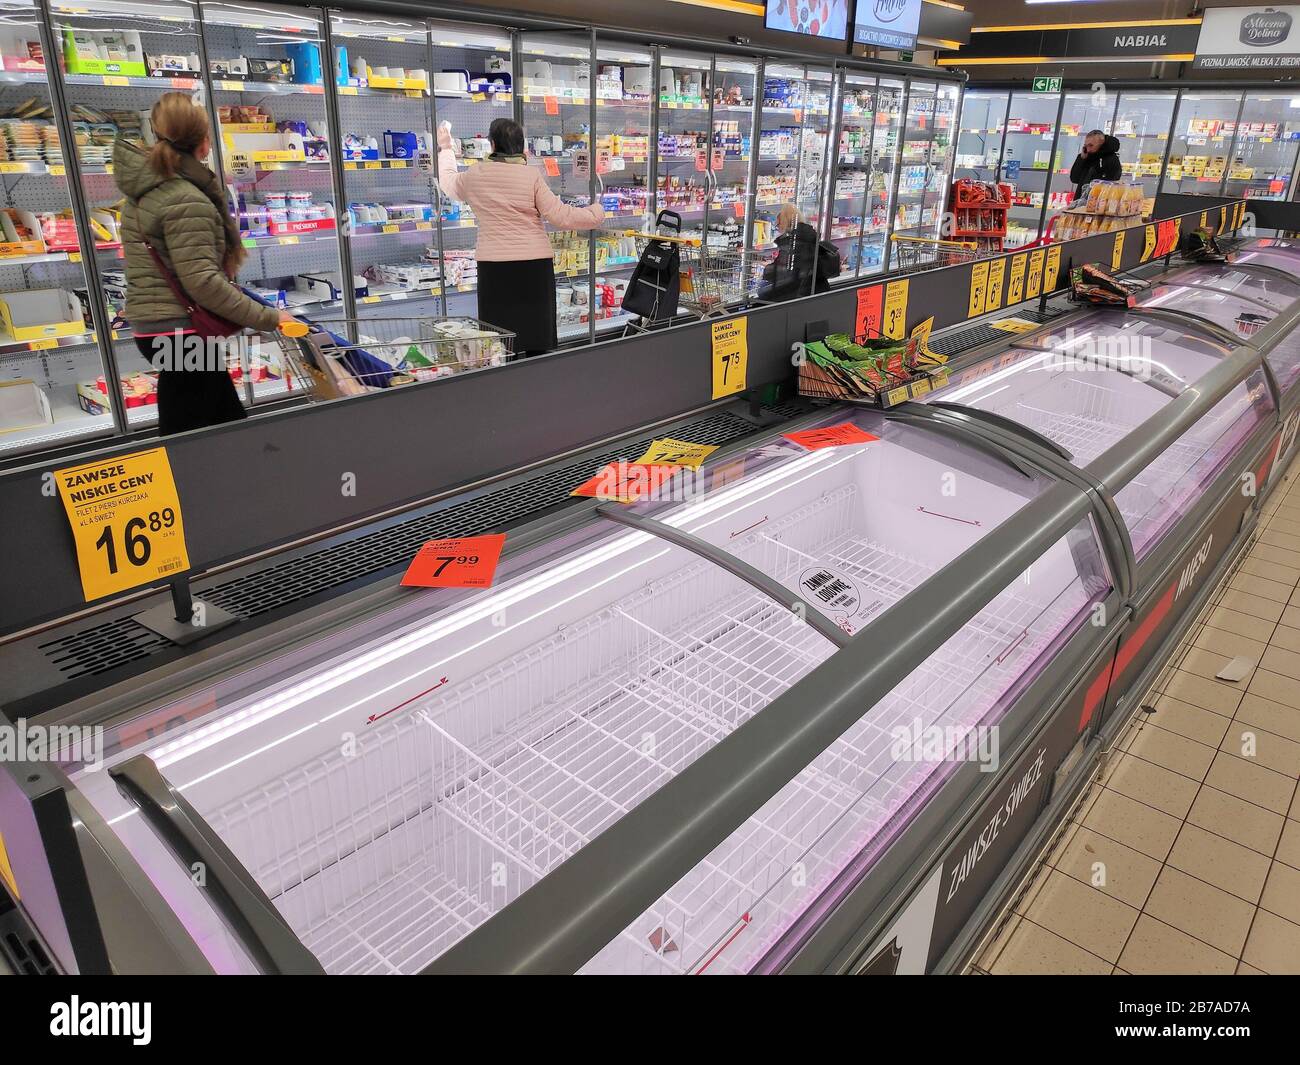 KATOWICE, POLAND - MARCH 14, 2020: People walk by empty meat refrigerators in a supermarket in Poland. Local people stockpiled food in anticipation of Stock Photo